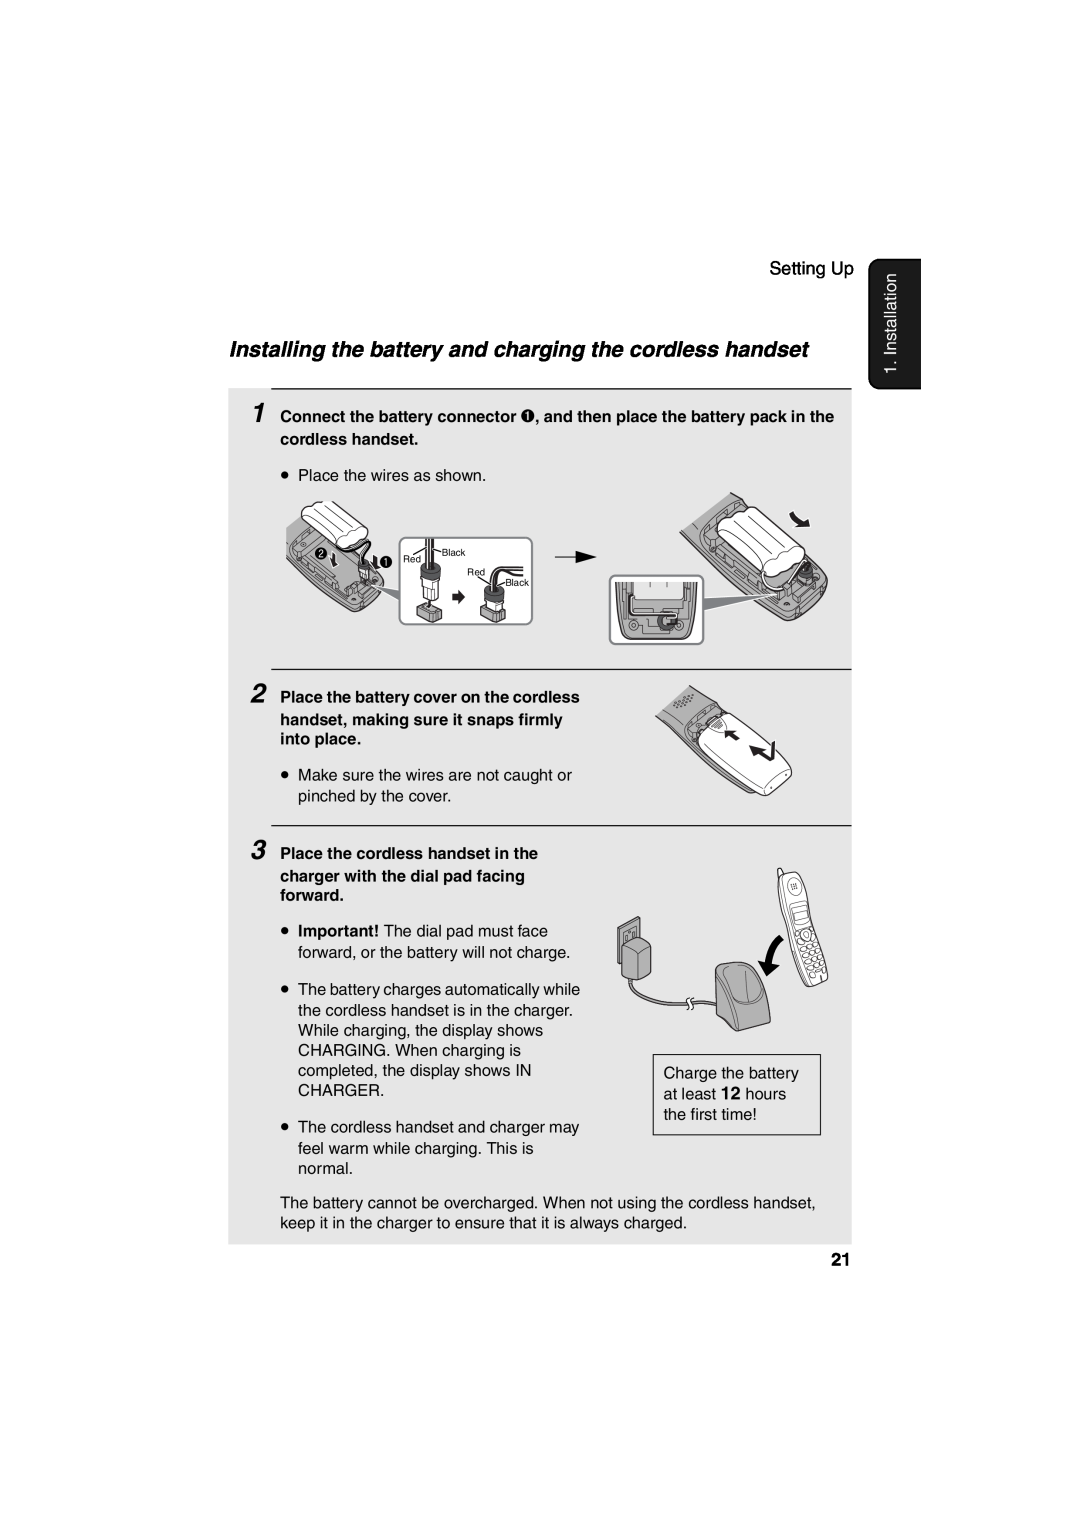 Sharp UX-CD600 Installing the battery and charging the cordless handset, Installation, Place the cordless handset in the 